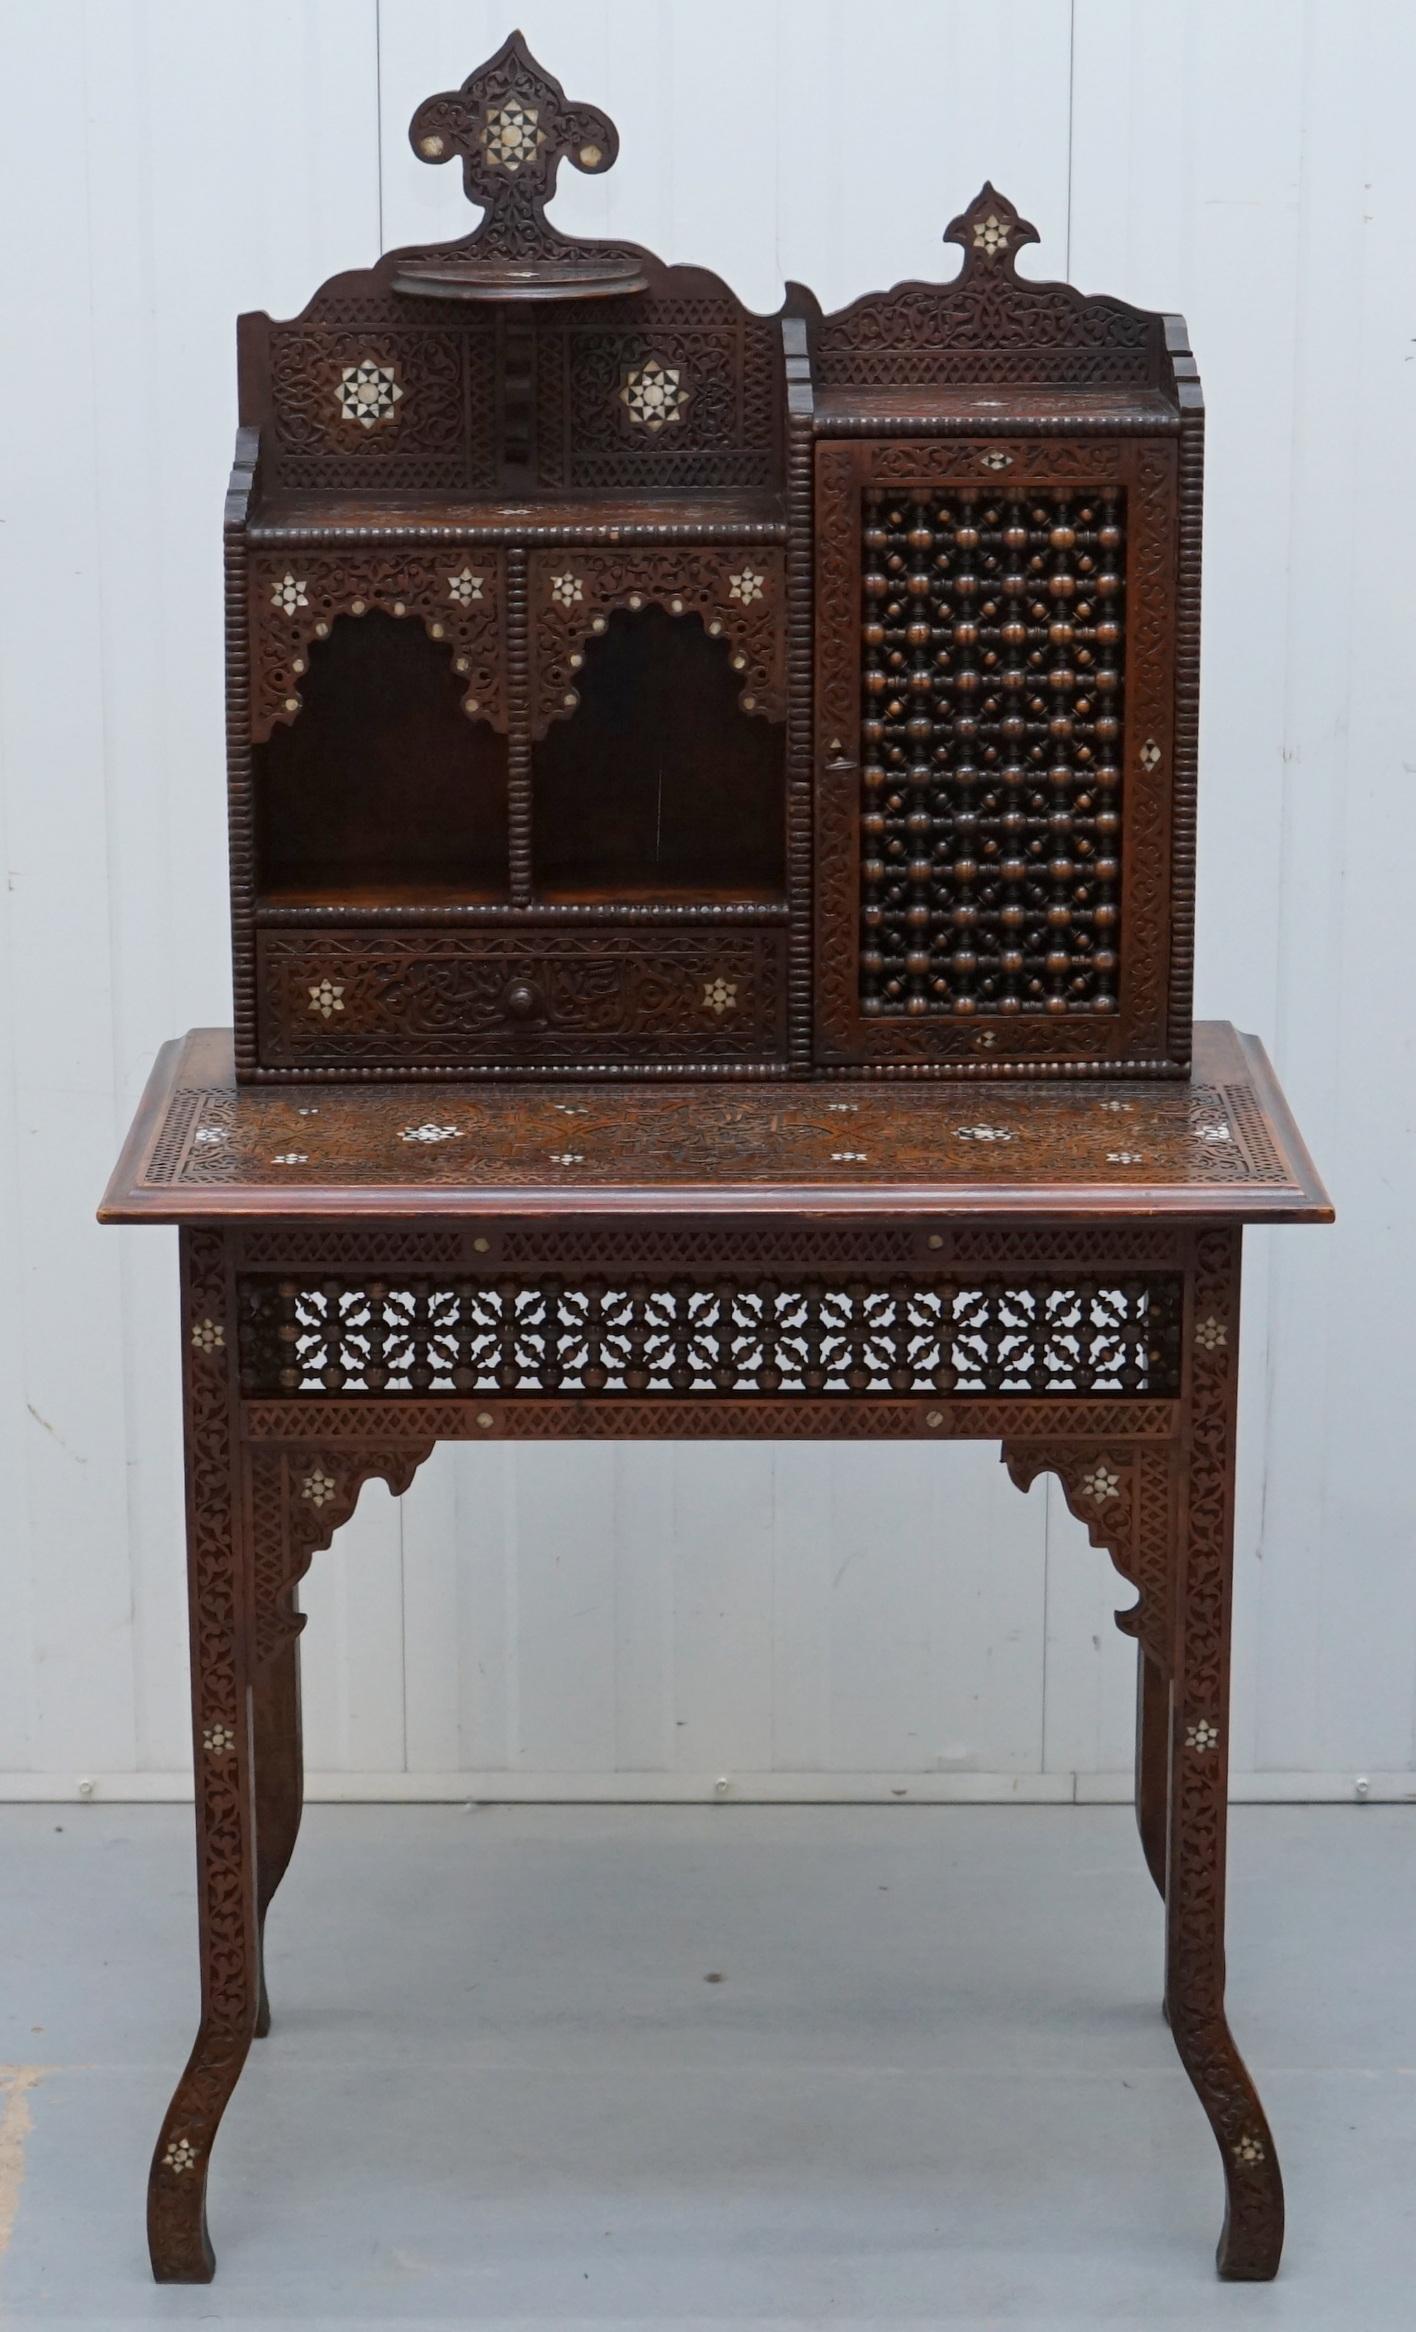 We are delighted to offer for sale this lovely hand carved with Mashrabiya panels and Mother of Pearl inlay desk retailed by Liberty’s London circa 1860

An absolute tour de force of style design and craftsmanship, made by a truly skilled and